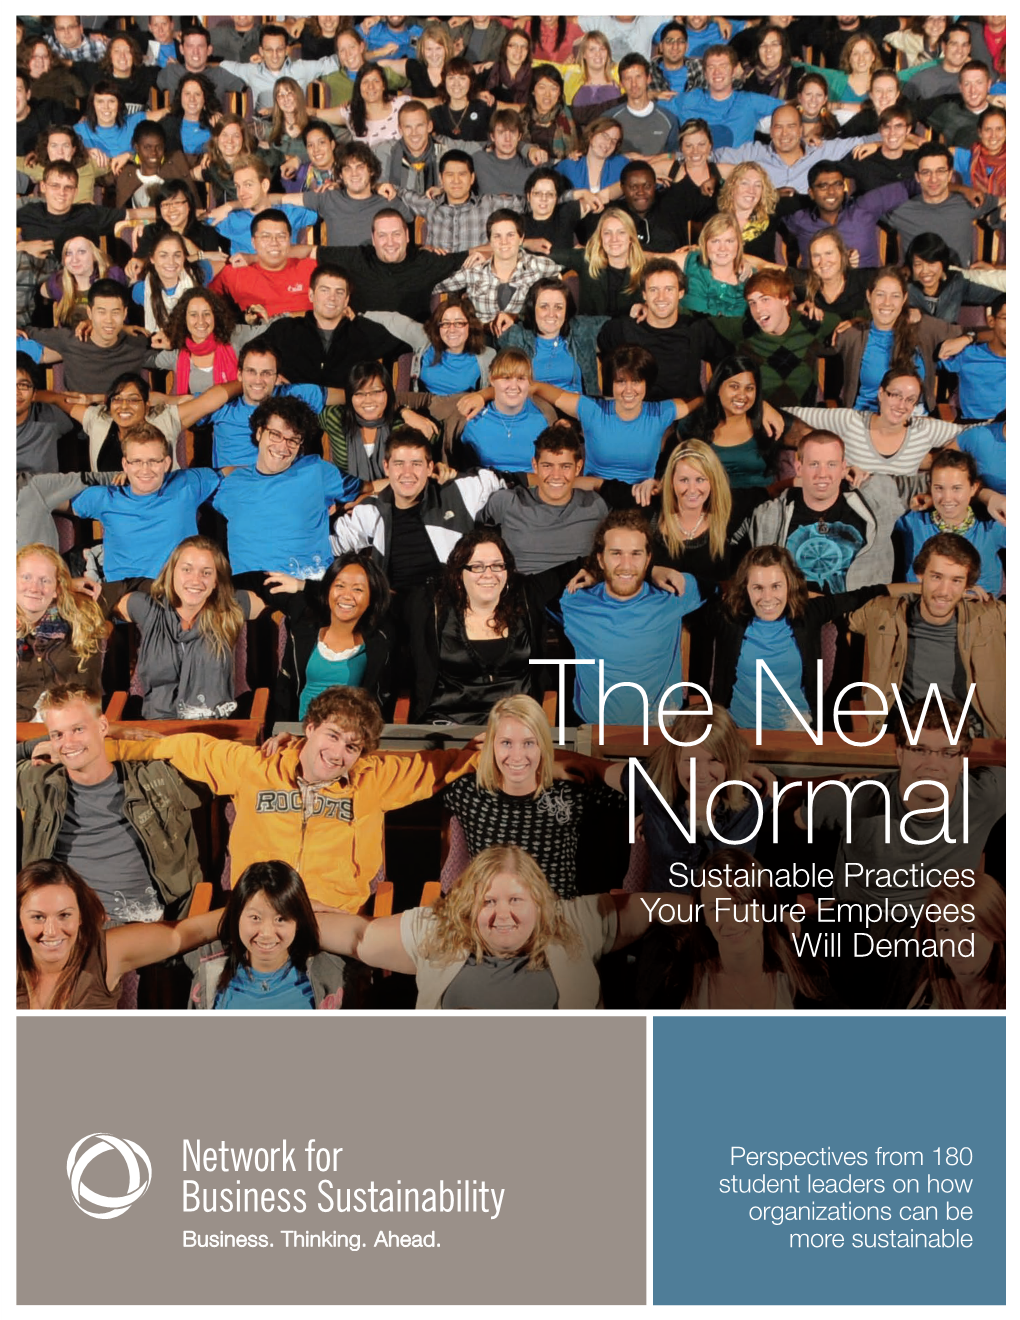 The New Normal Sustainable Practices Your Future Employees Will Demand